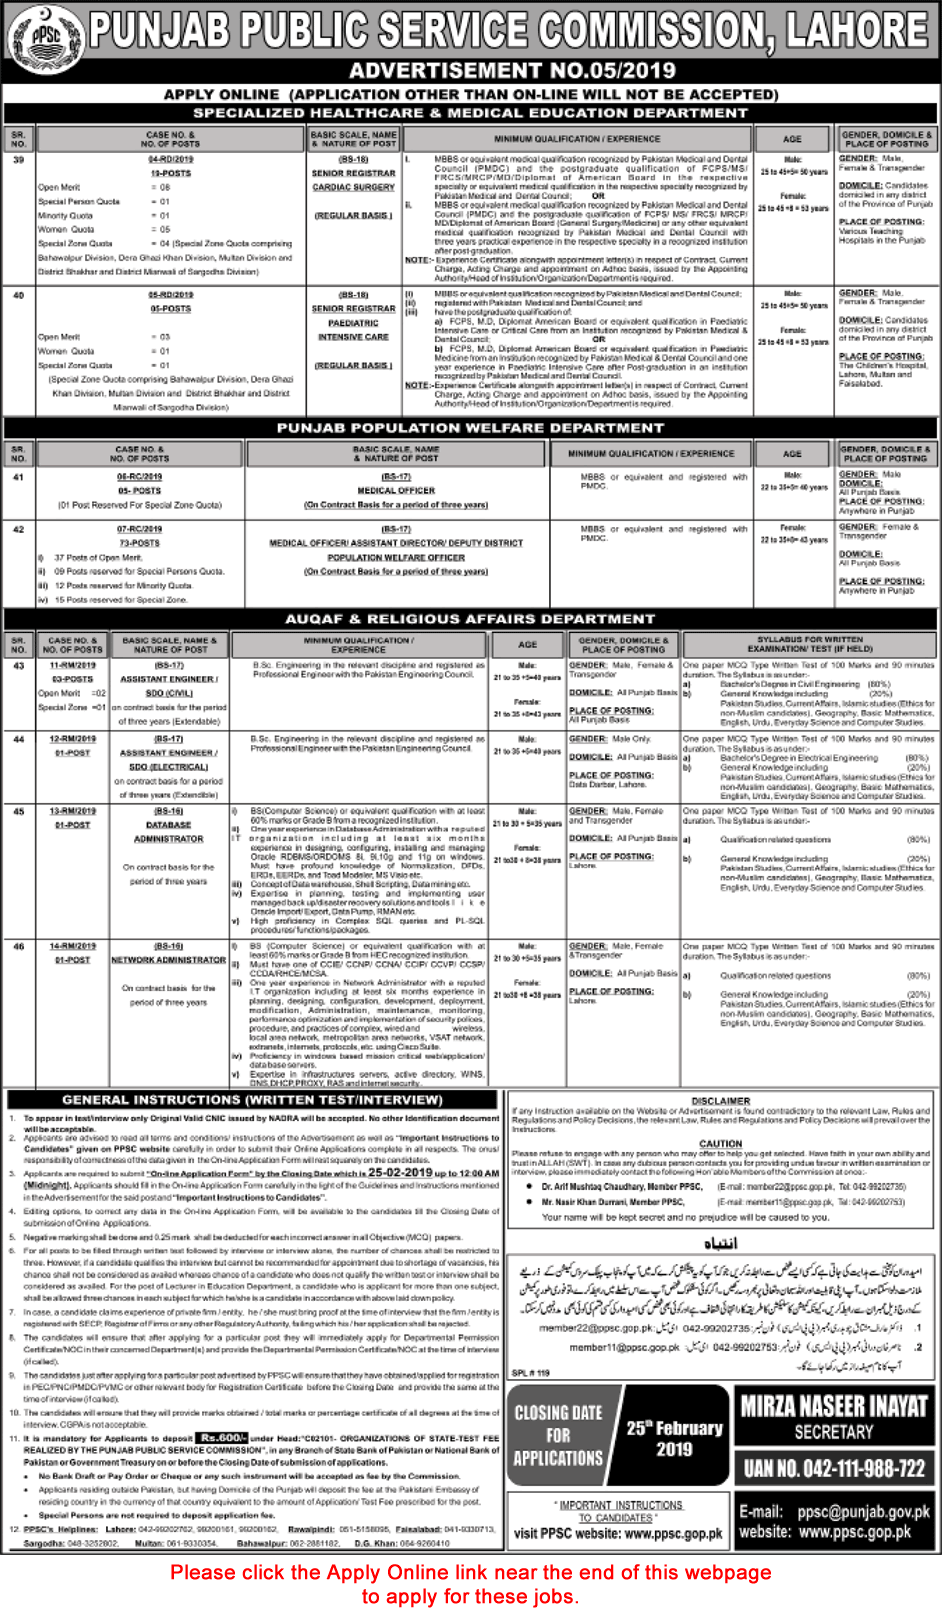 PPSC Jobs February 2019 Apply Online Consolidated Advertisement No 05/2019 5/2019 Latest